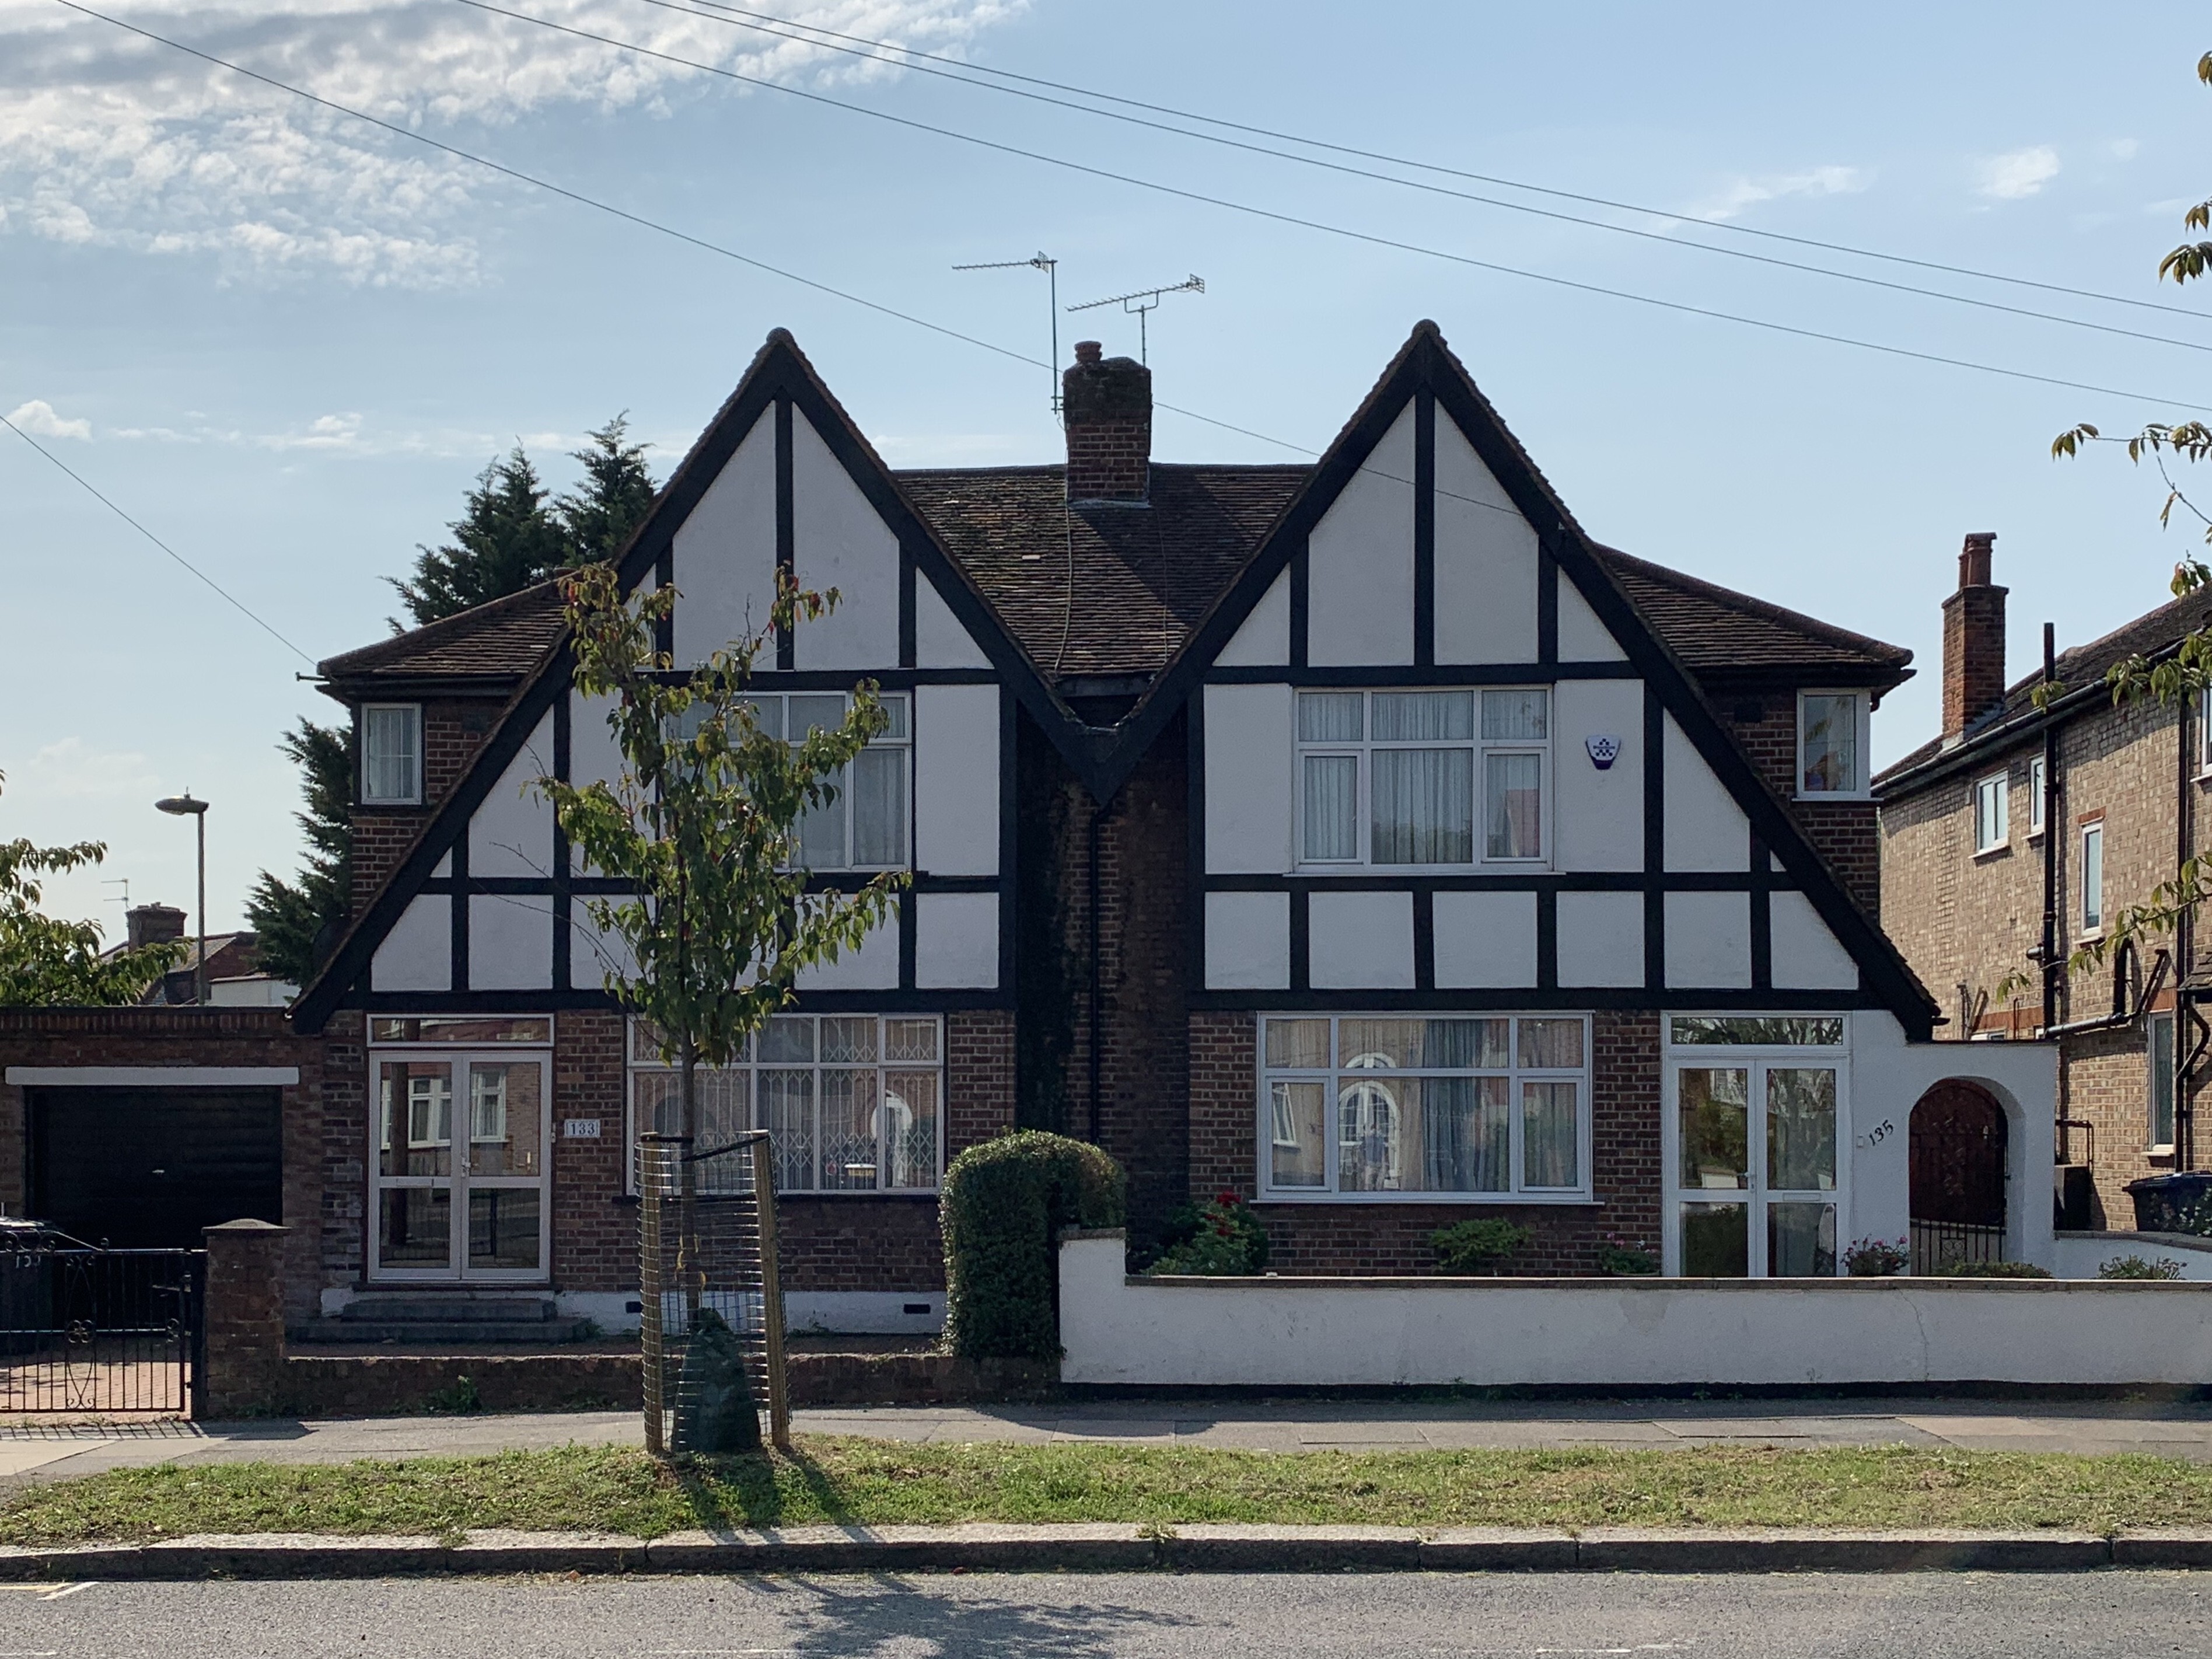 Mock Tudor houses along Devonshire Road in Mill Hill, in the London borough of Barnet, which has been compared to Hong Kong’s wealthy Kowloon Tong district. Photo: Delle Chan